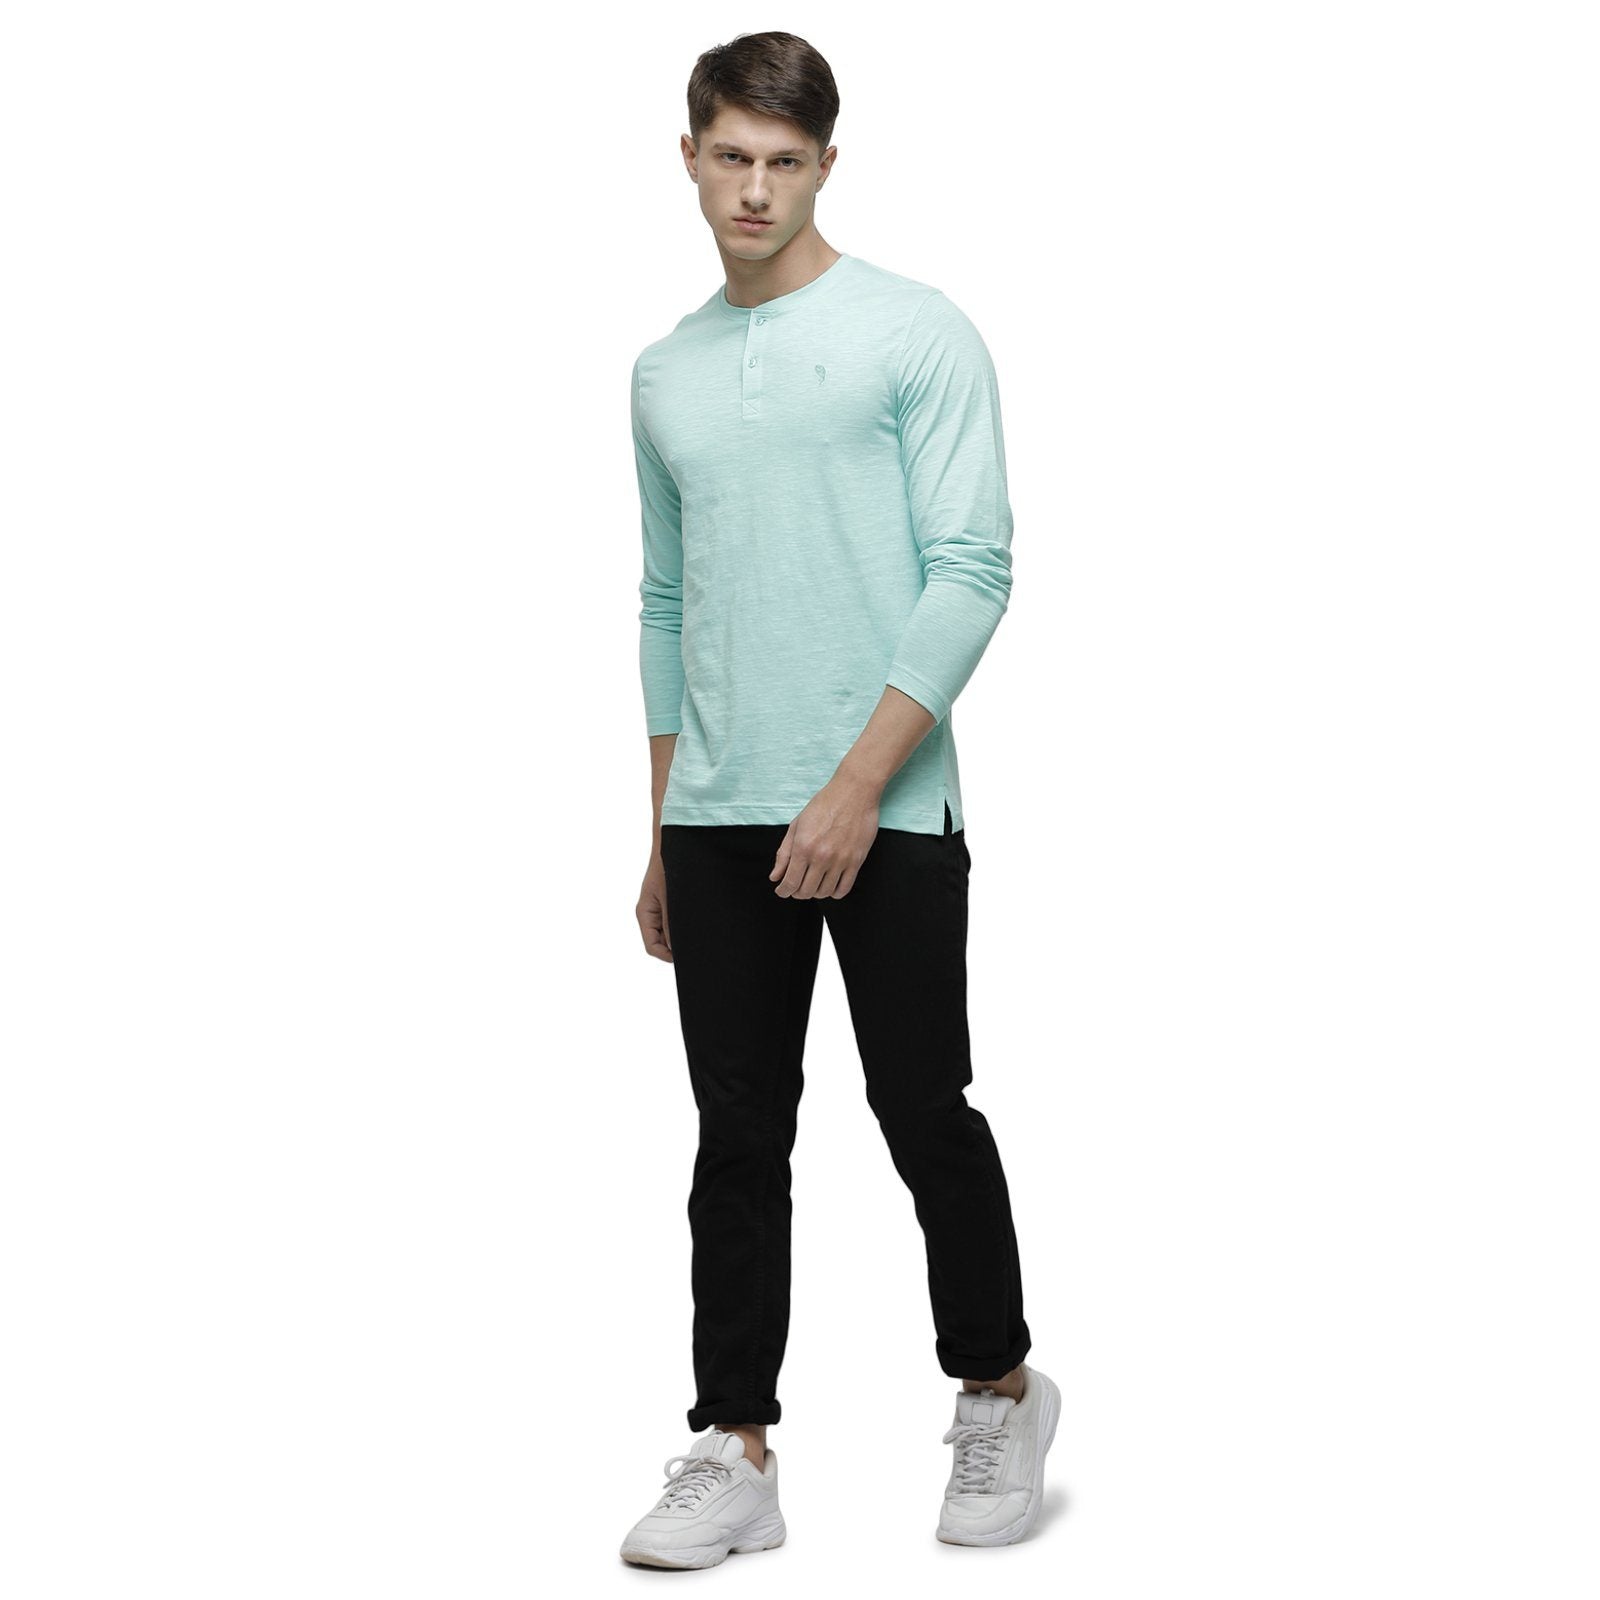 Classic polo Men's Turquoise Full Sleeve Slim Fit Henley Crew T-Shirt - Ozel- Lt. Grass T-shirt Classic Polo 